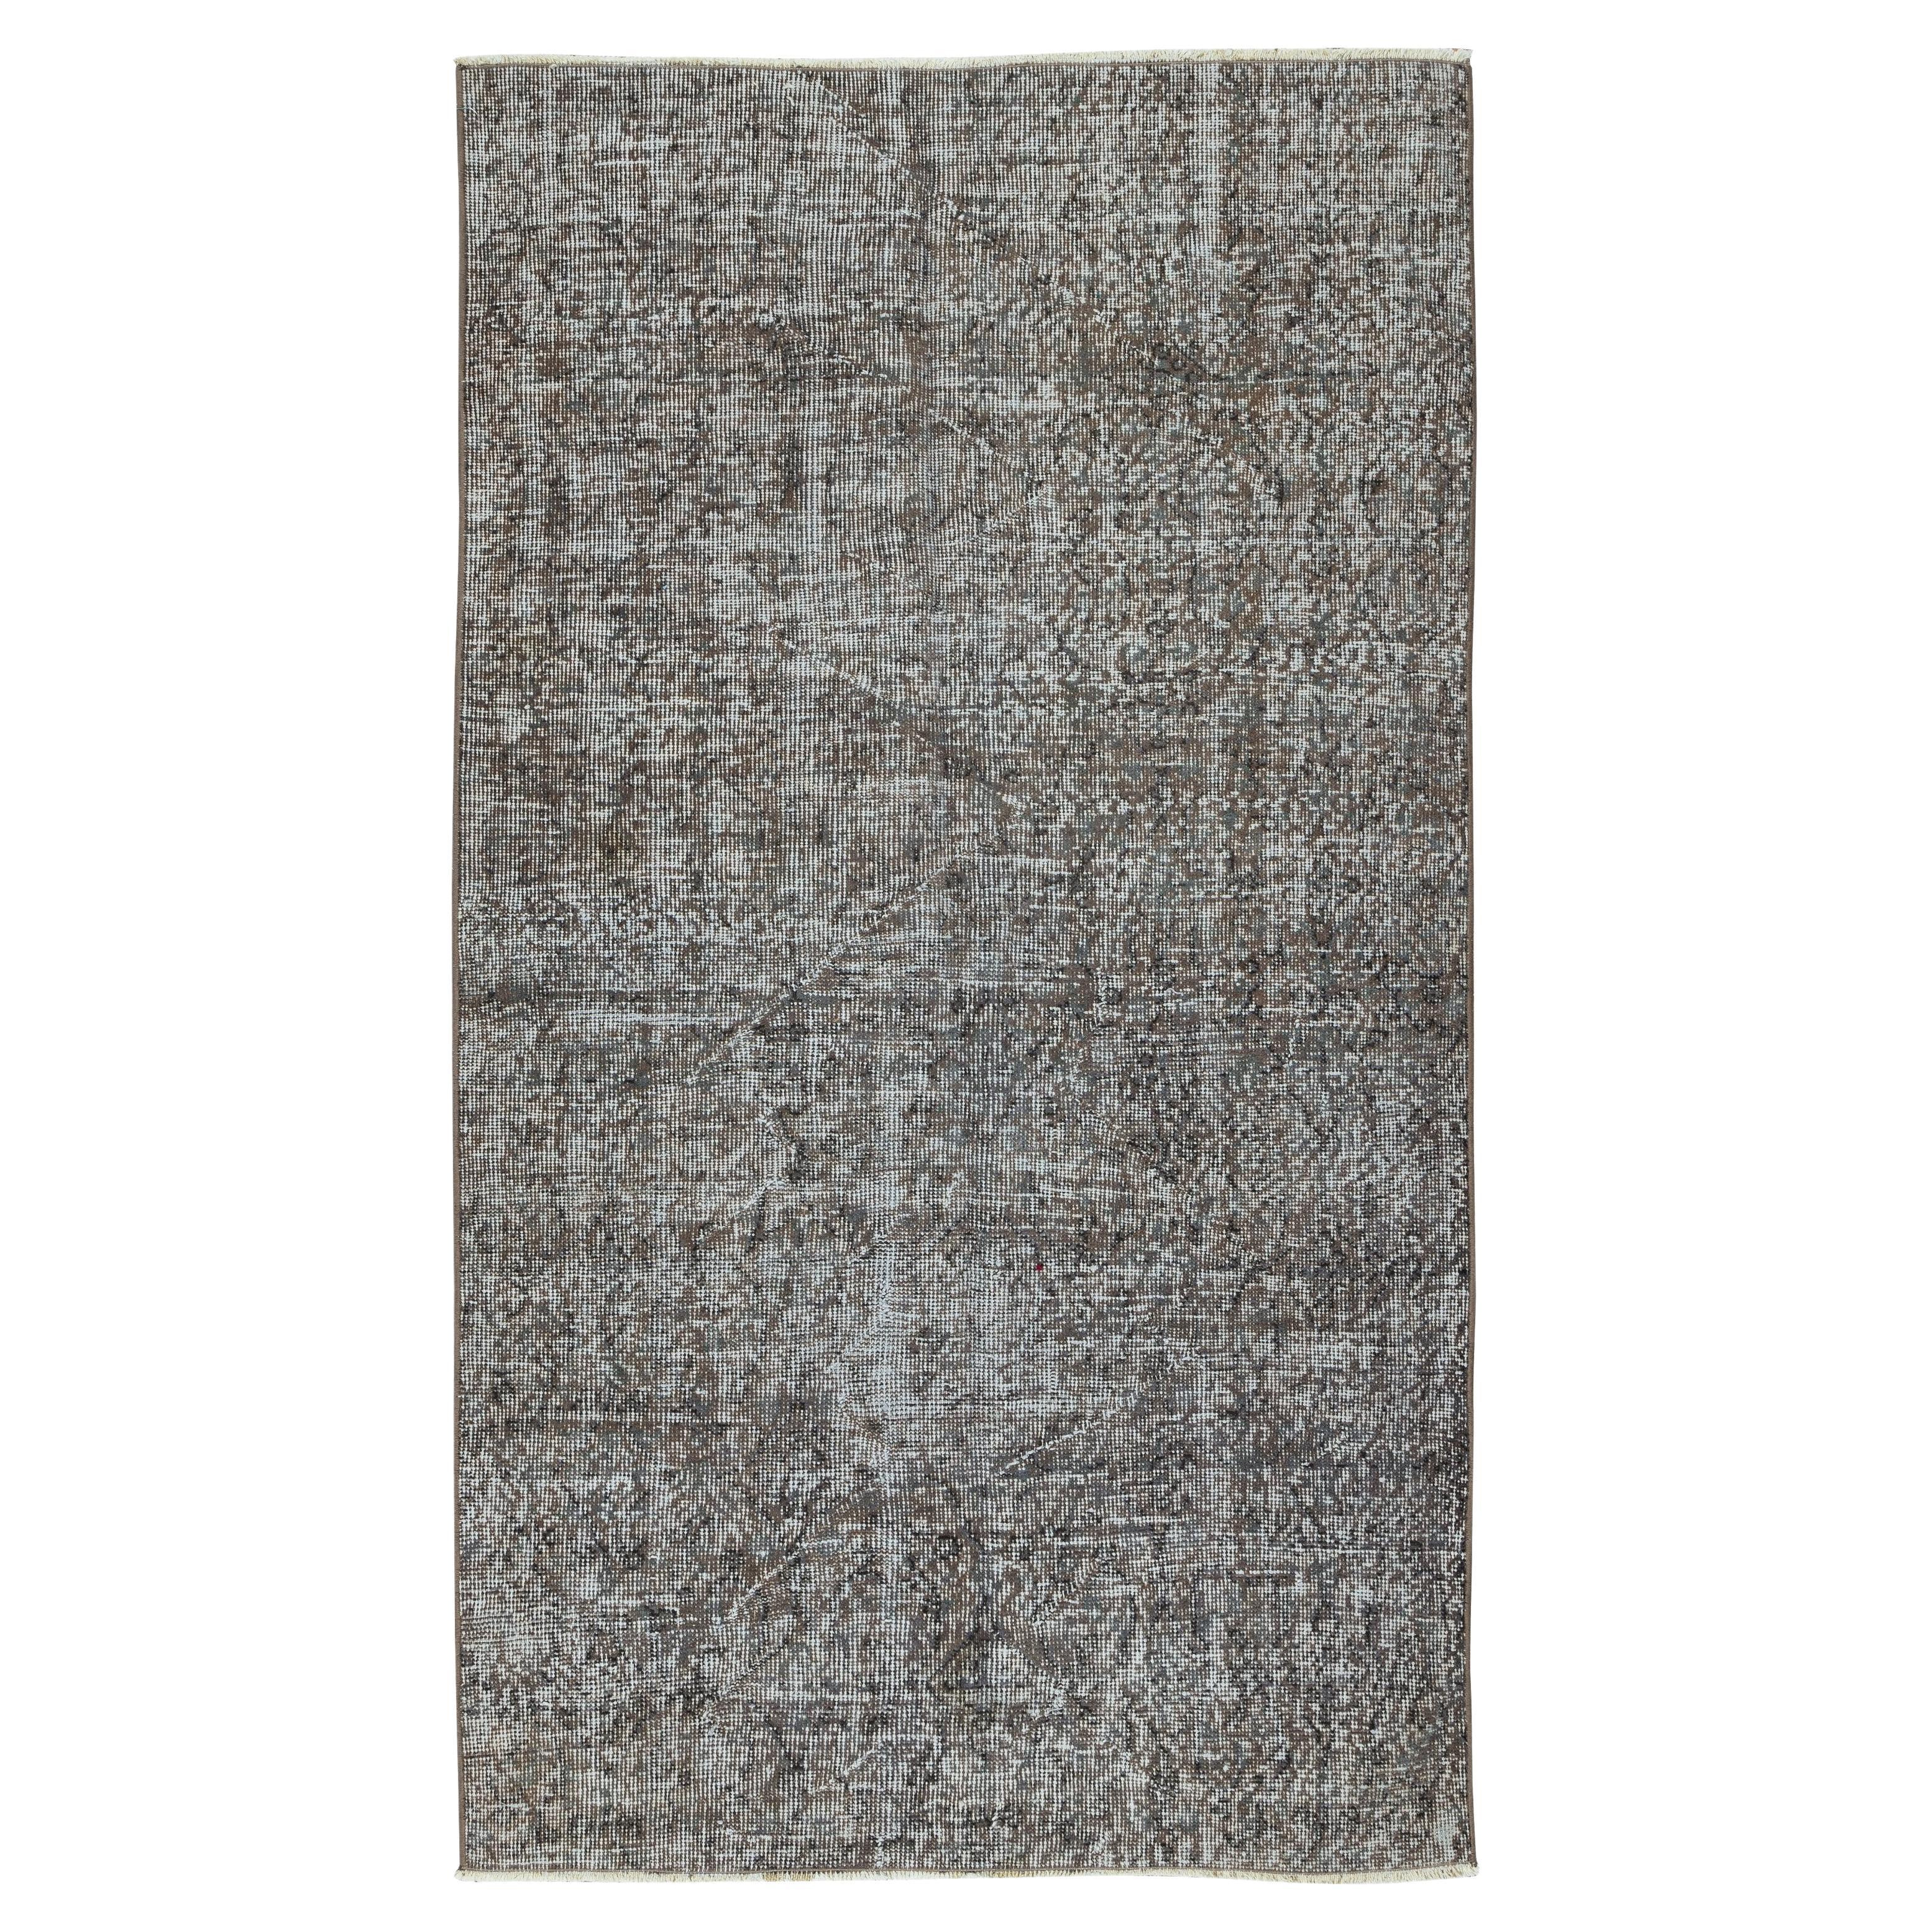 3.7x6.5 Ft Mid-Century Handmade Turkish Rug Over-Dyed in Grey 4 Modern Interiors For Sale